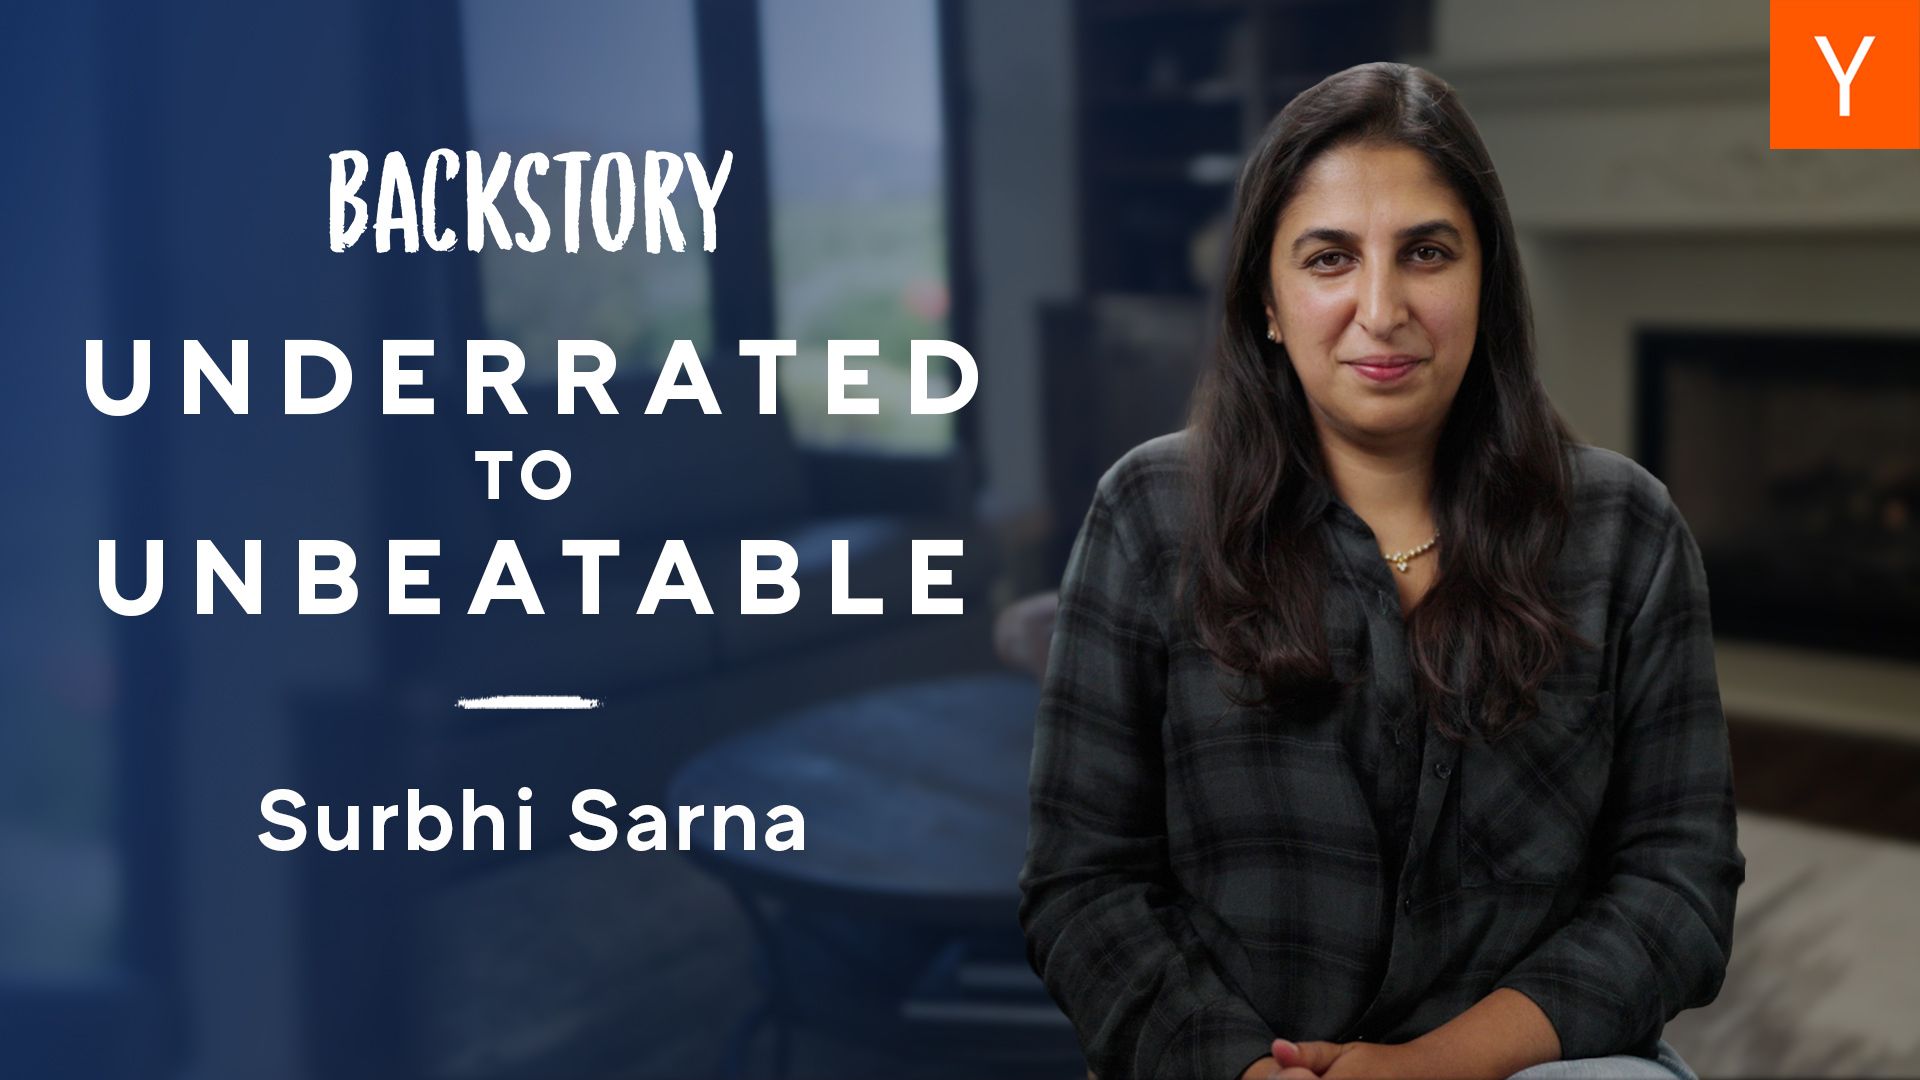 YC's Surbhi Sarna next to the text "Underrated to Unbeatable"